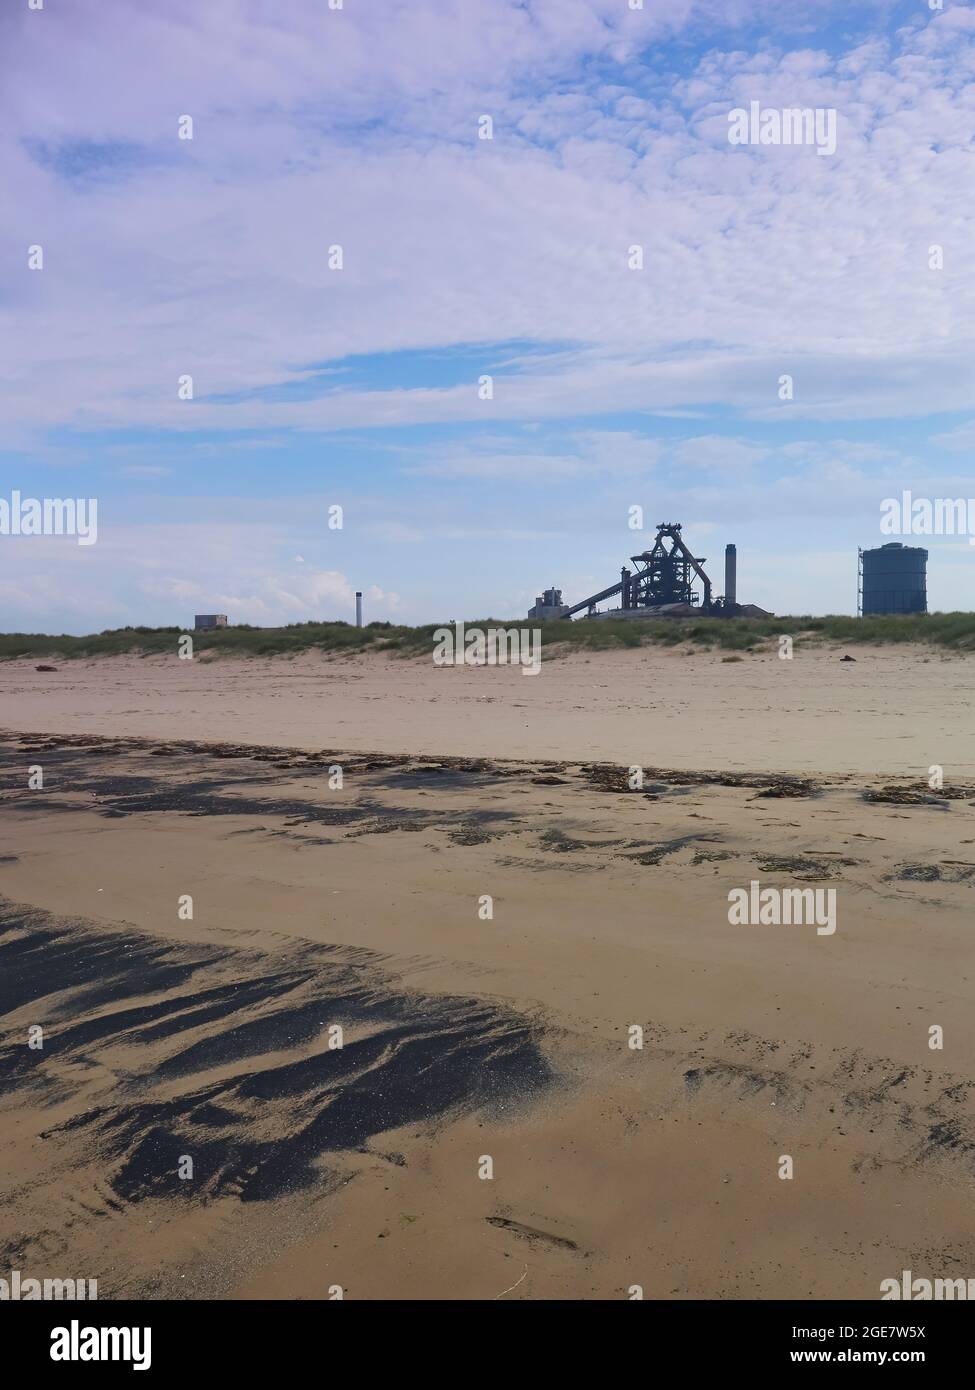 A sweep of sea coal, sand and sand dunes, ahead of the skeletal silhouette of Redcar’s abandoned steel works, under fluffy clouds and blue summer sky. Stock Photo